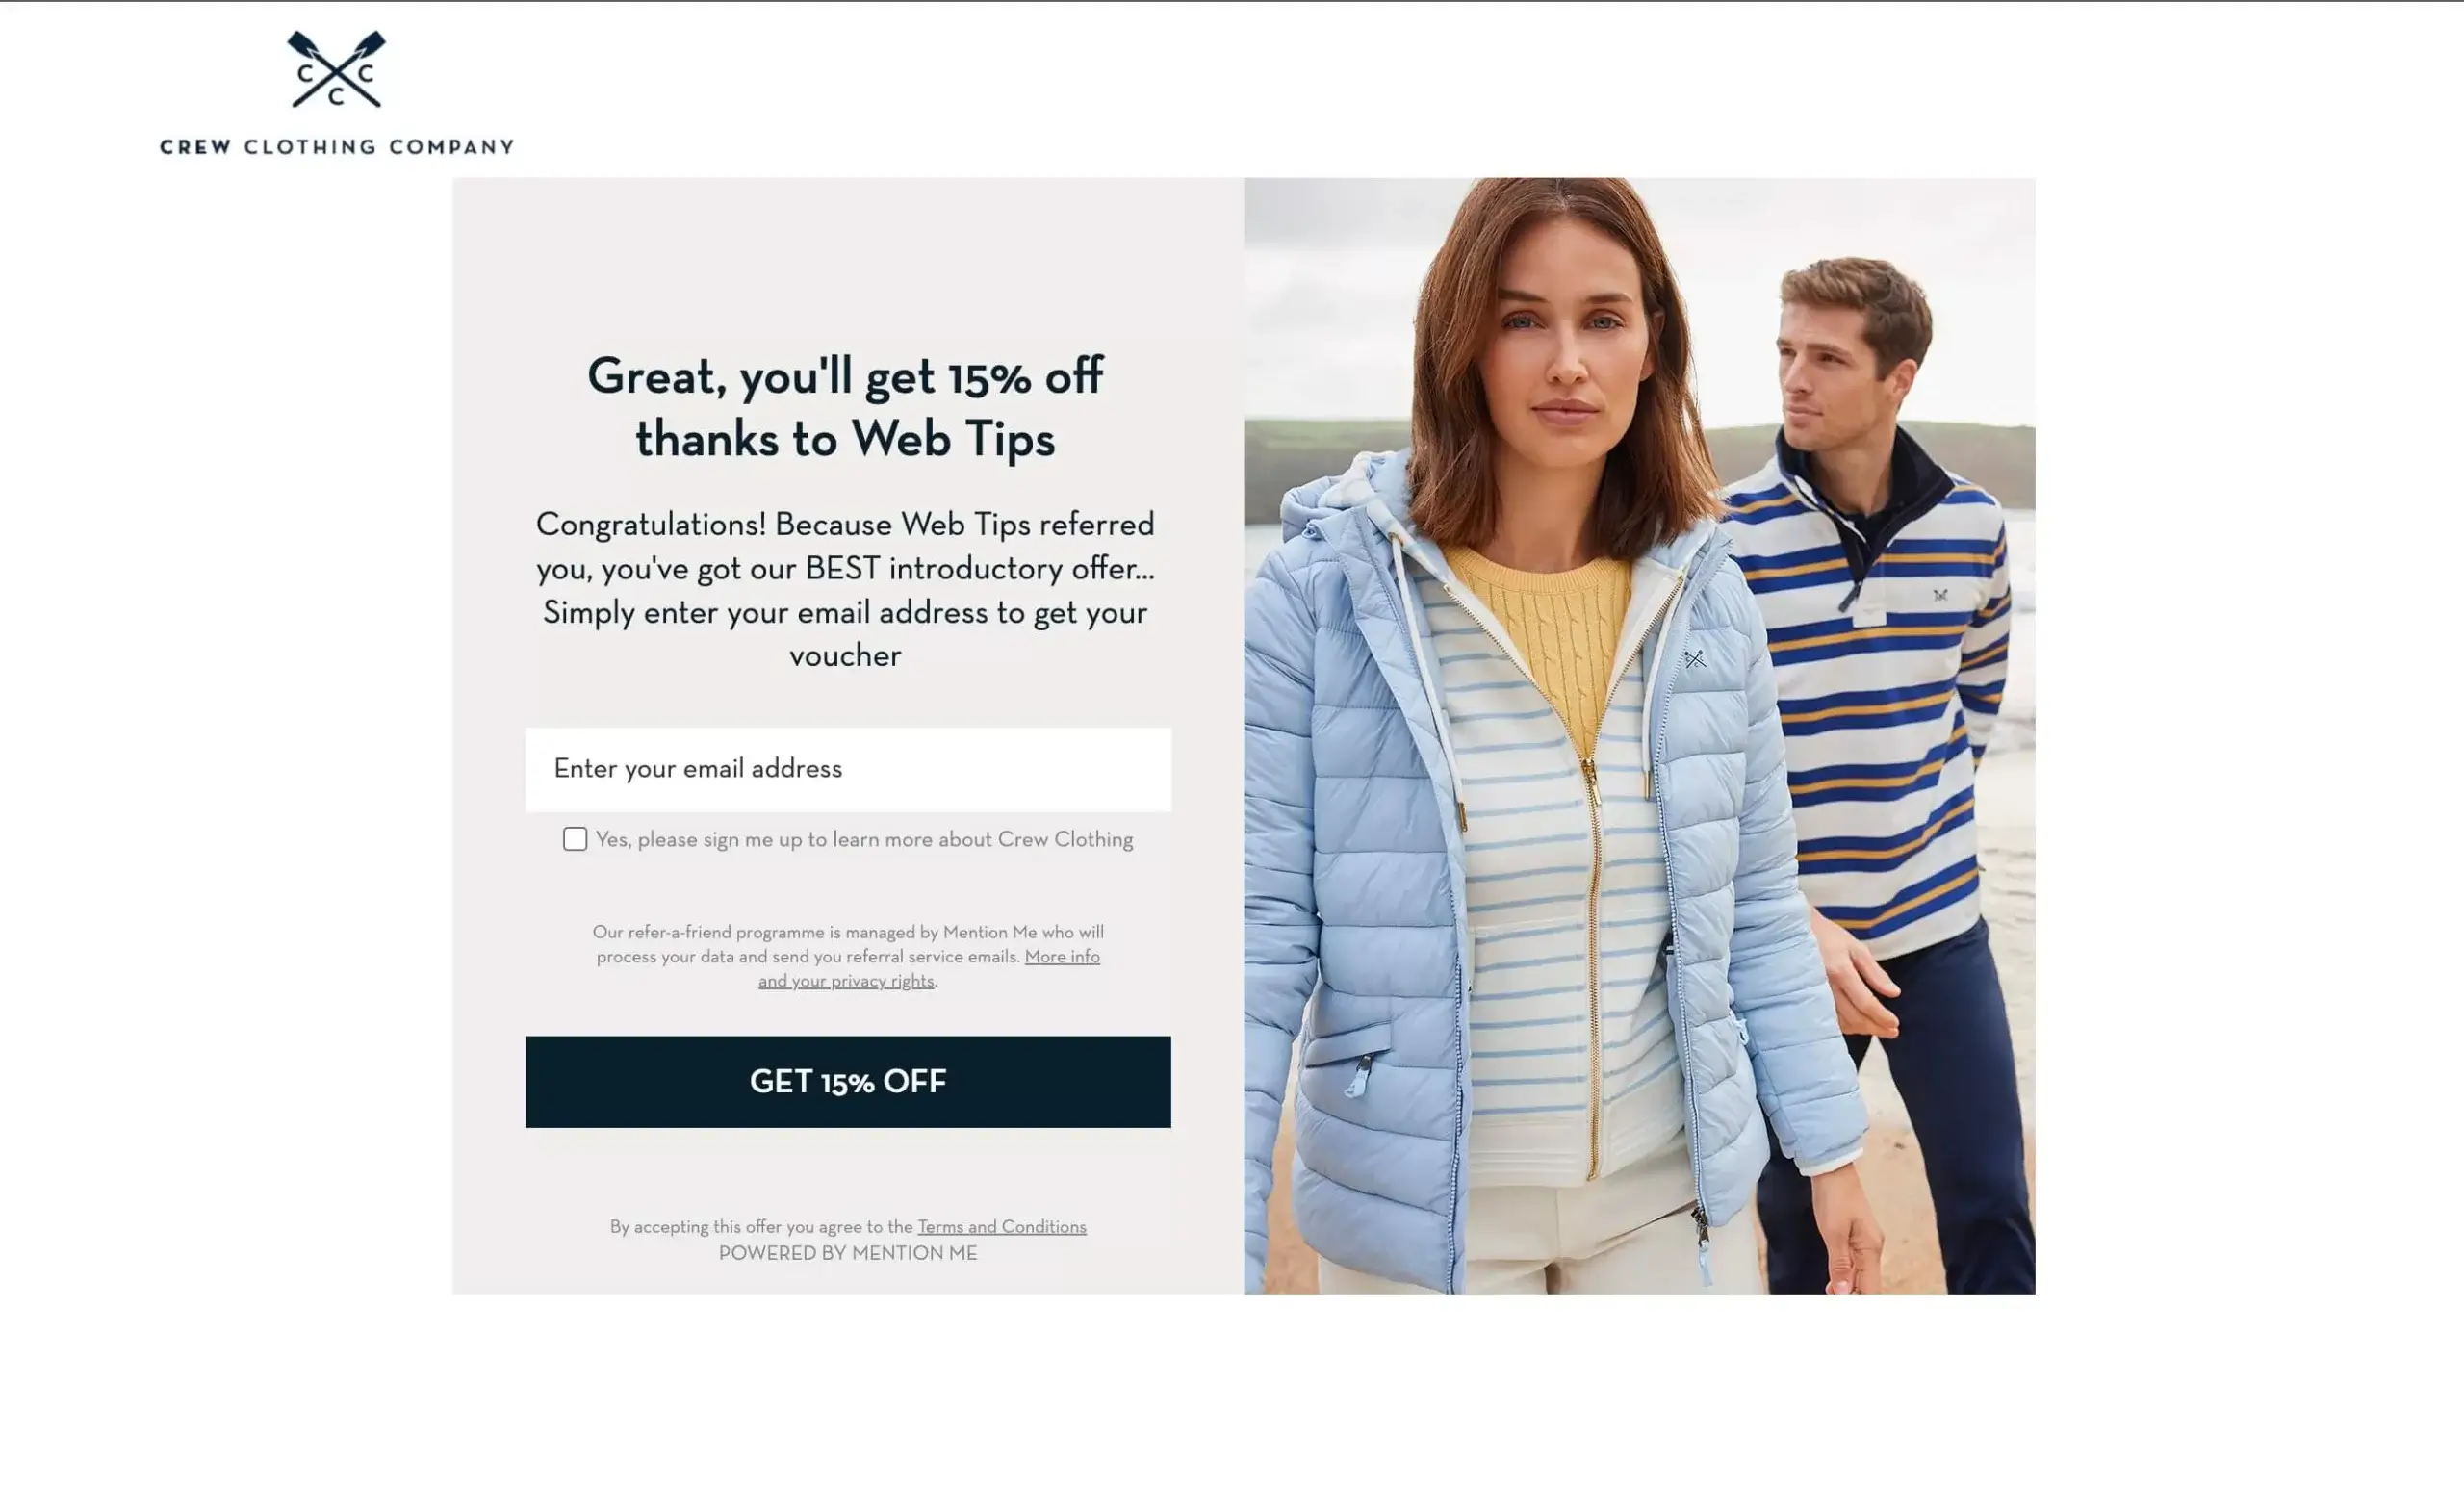 Crew Clothing referral code discount invitation for new user